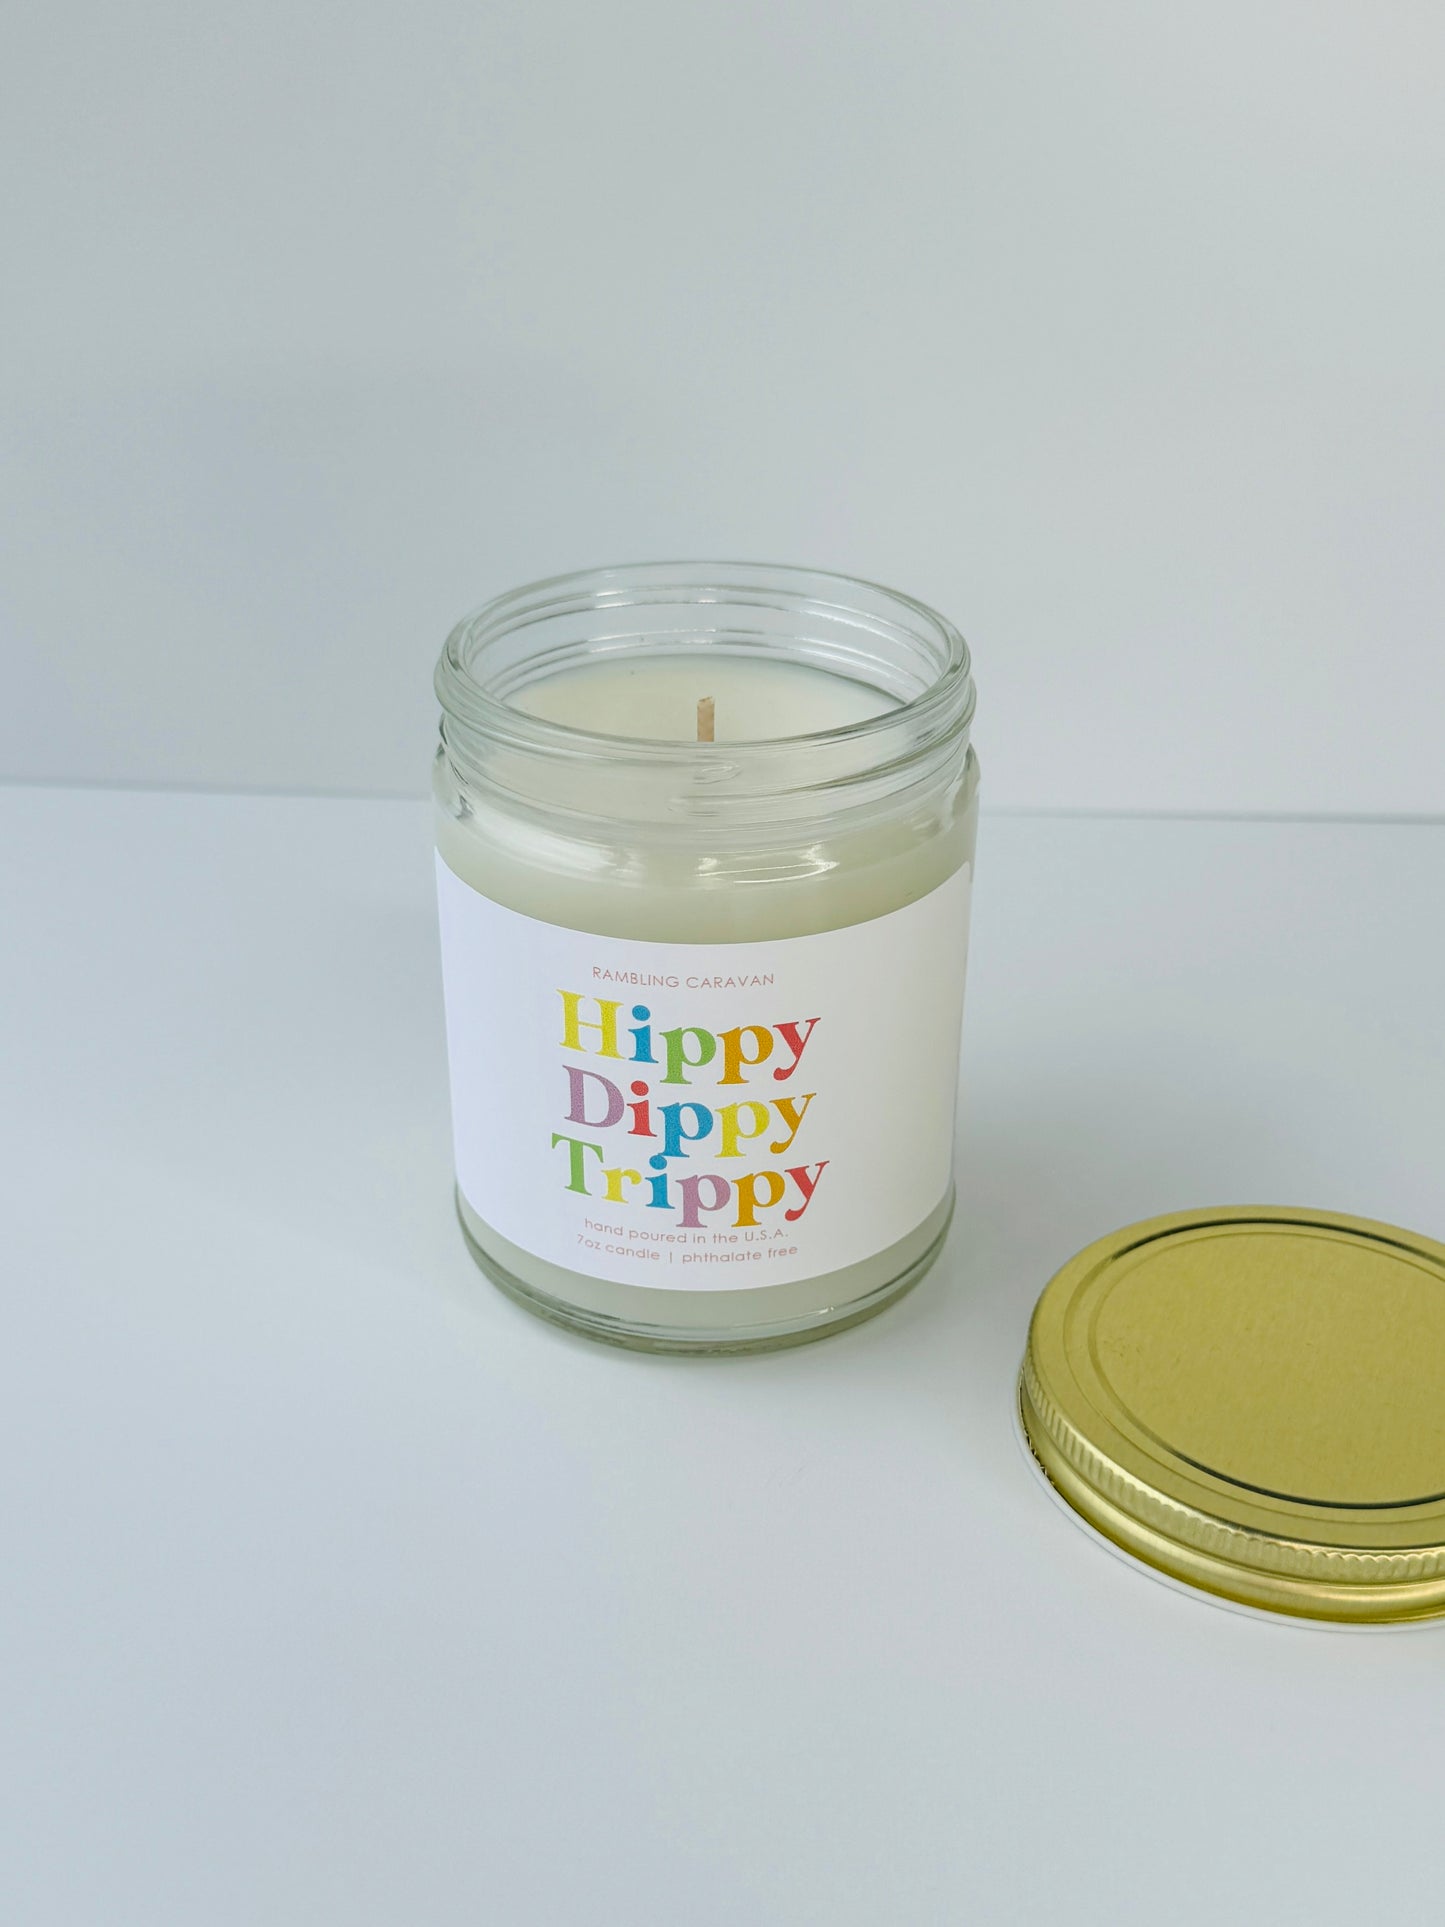 Hippy, Dippy, Trippy Candle